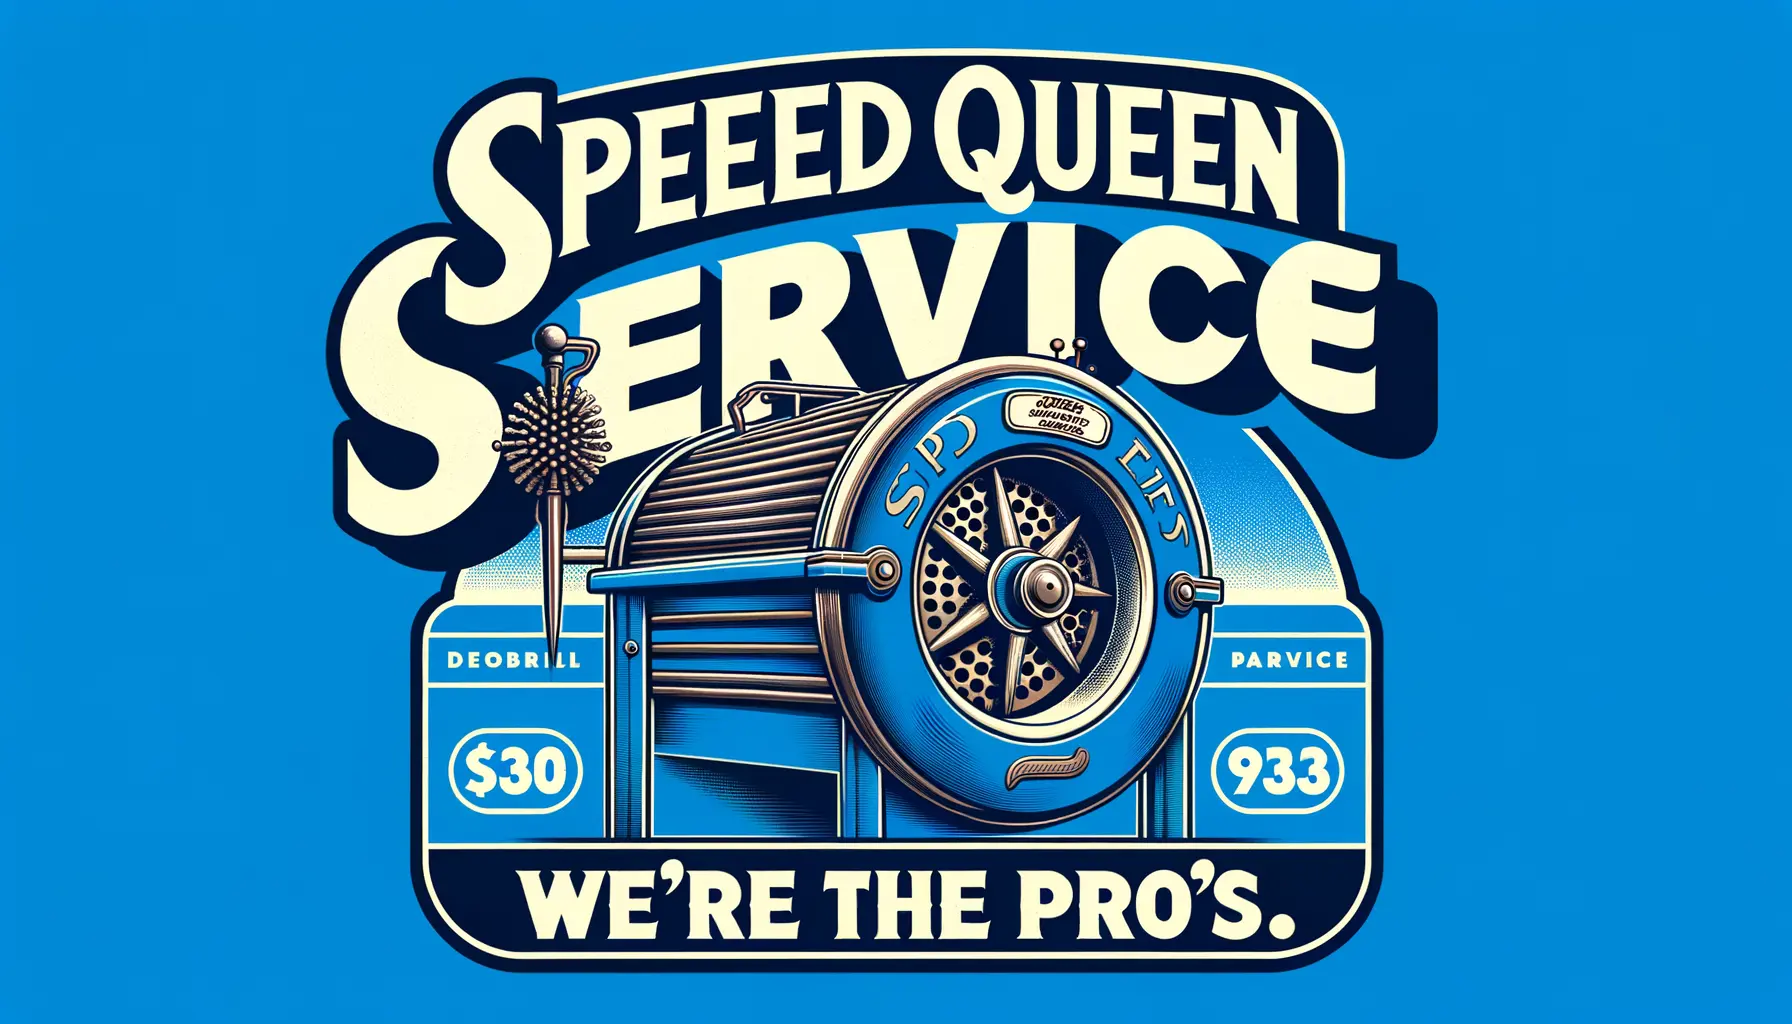 I need a banner that says &quot;Speed Queen Service. We're The Pro's.&quot; Make sure Speed Queen Service. We're The Pro's is spelled correctly. Put it on a blue background. Make it feel old timey and add an old wringer washer to the image.